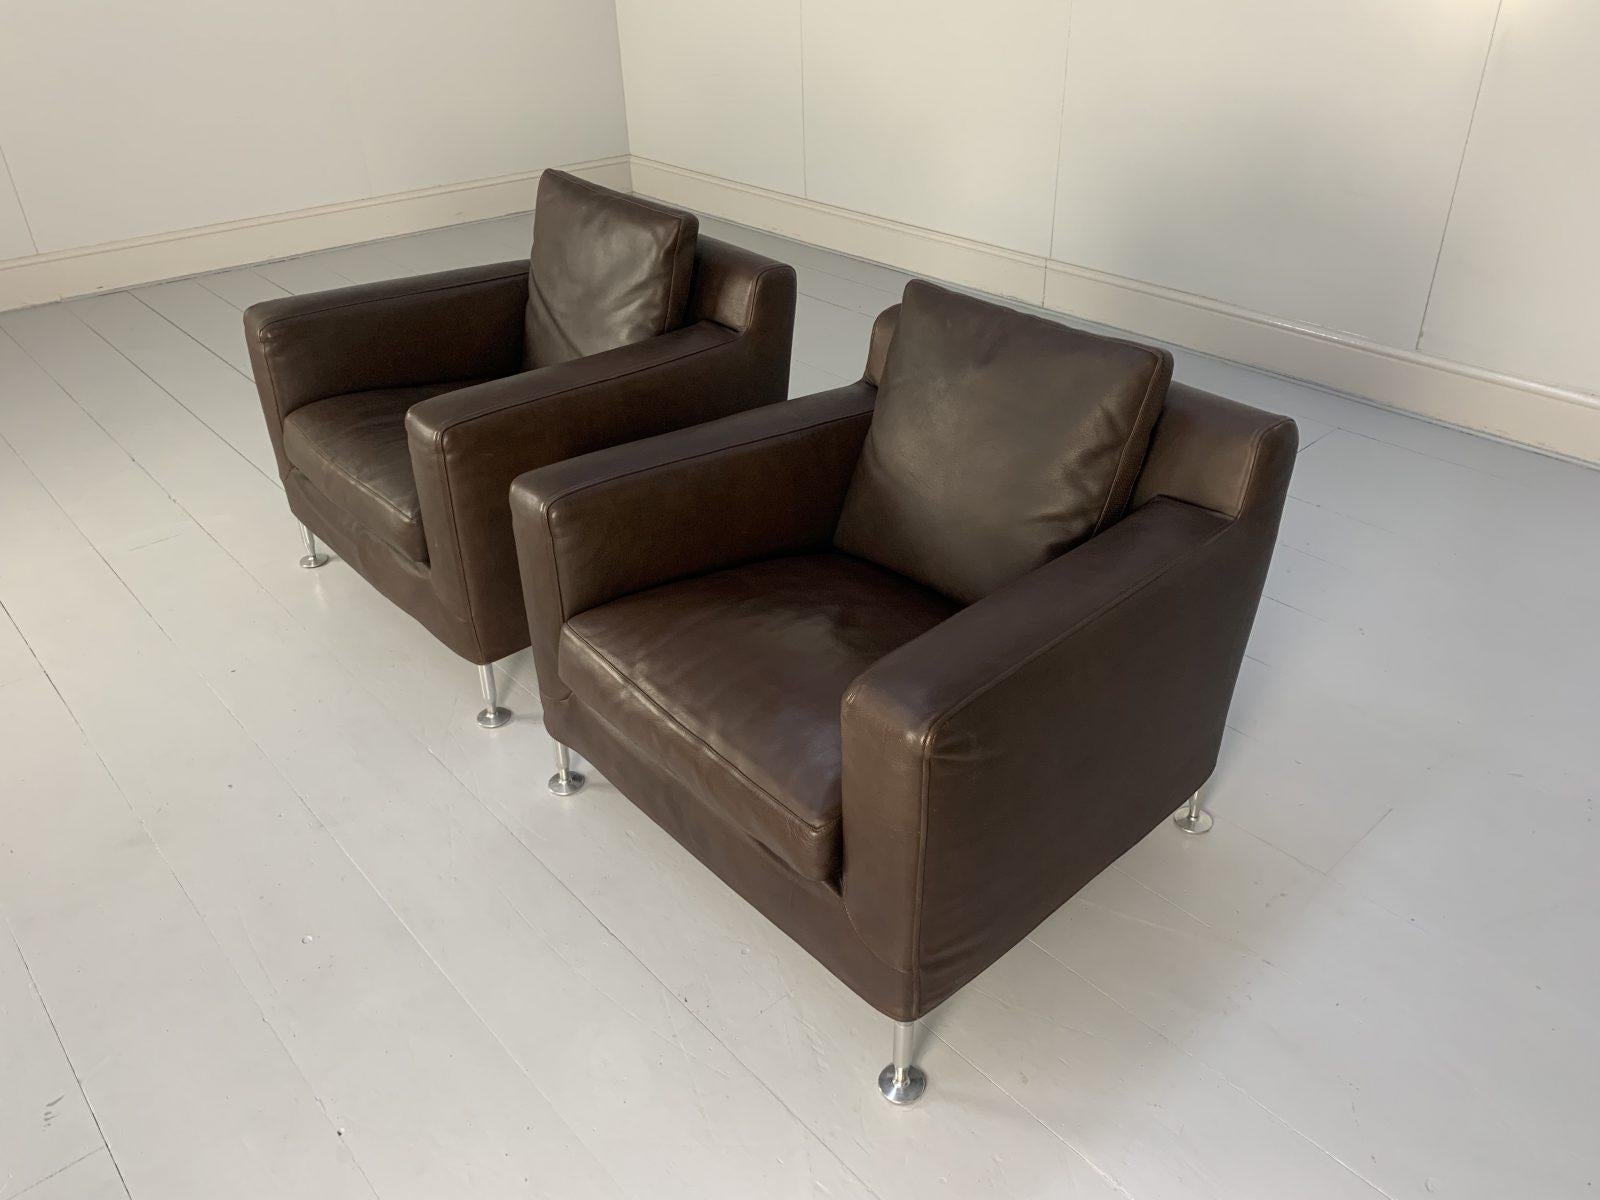 Pair of B&B Italia “Harry H85” Armchairs in Brown “Gamma” Leather For Sale 1